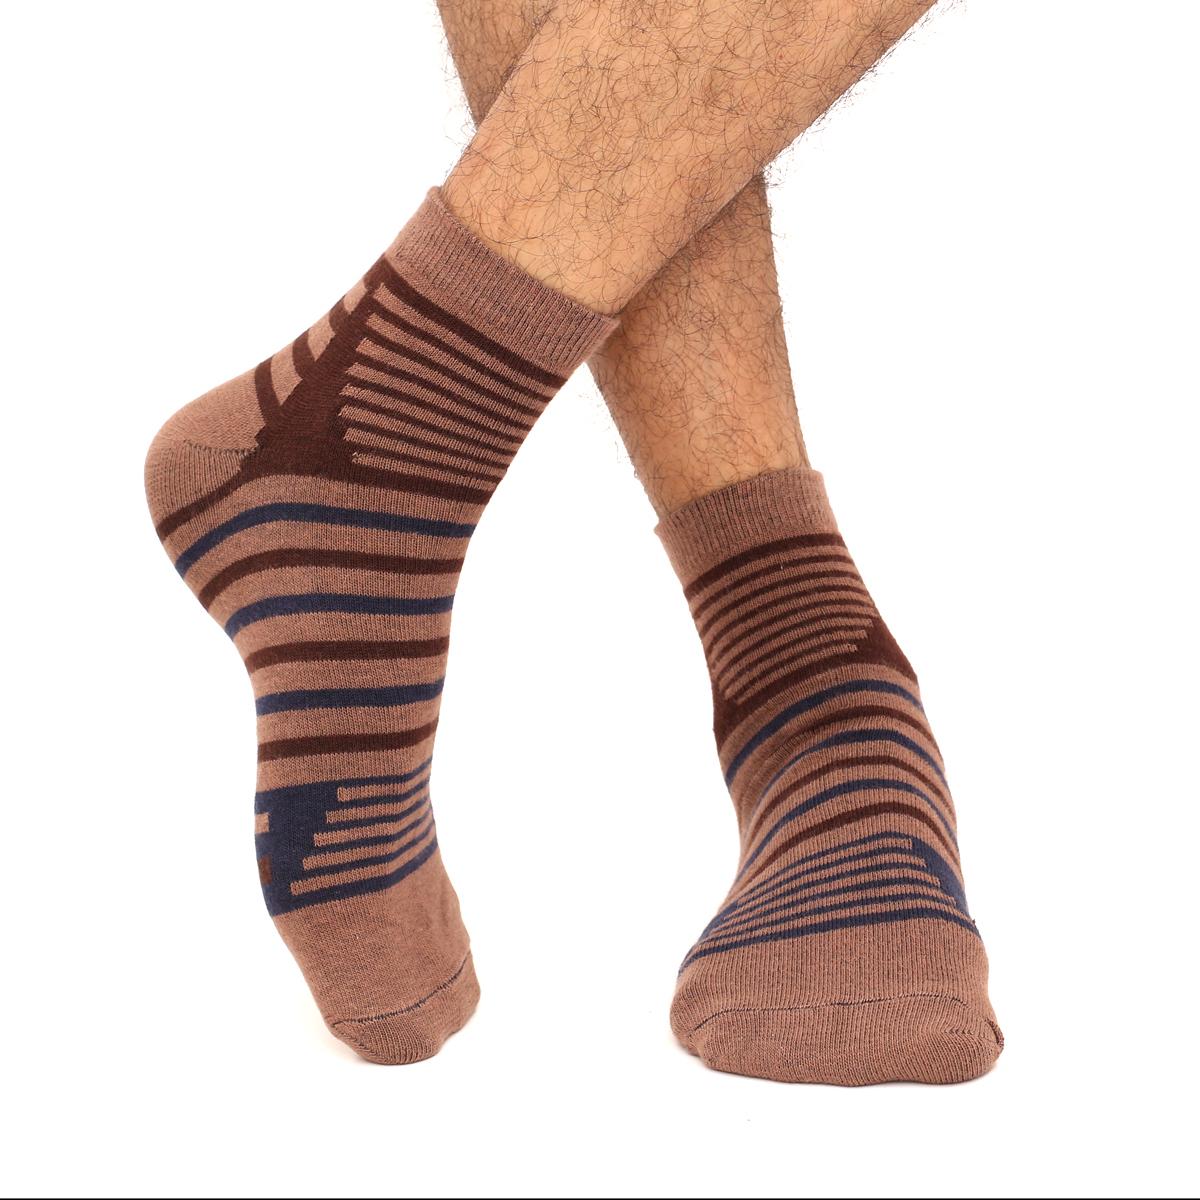 Action Ankle Socks for Men by MB Hosiery